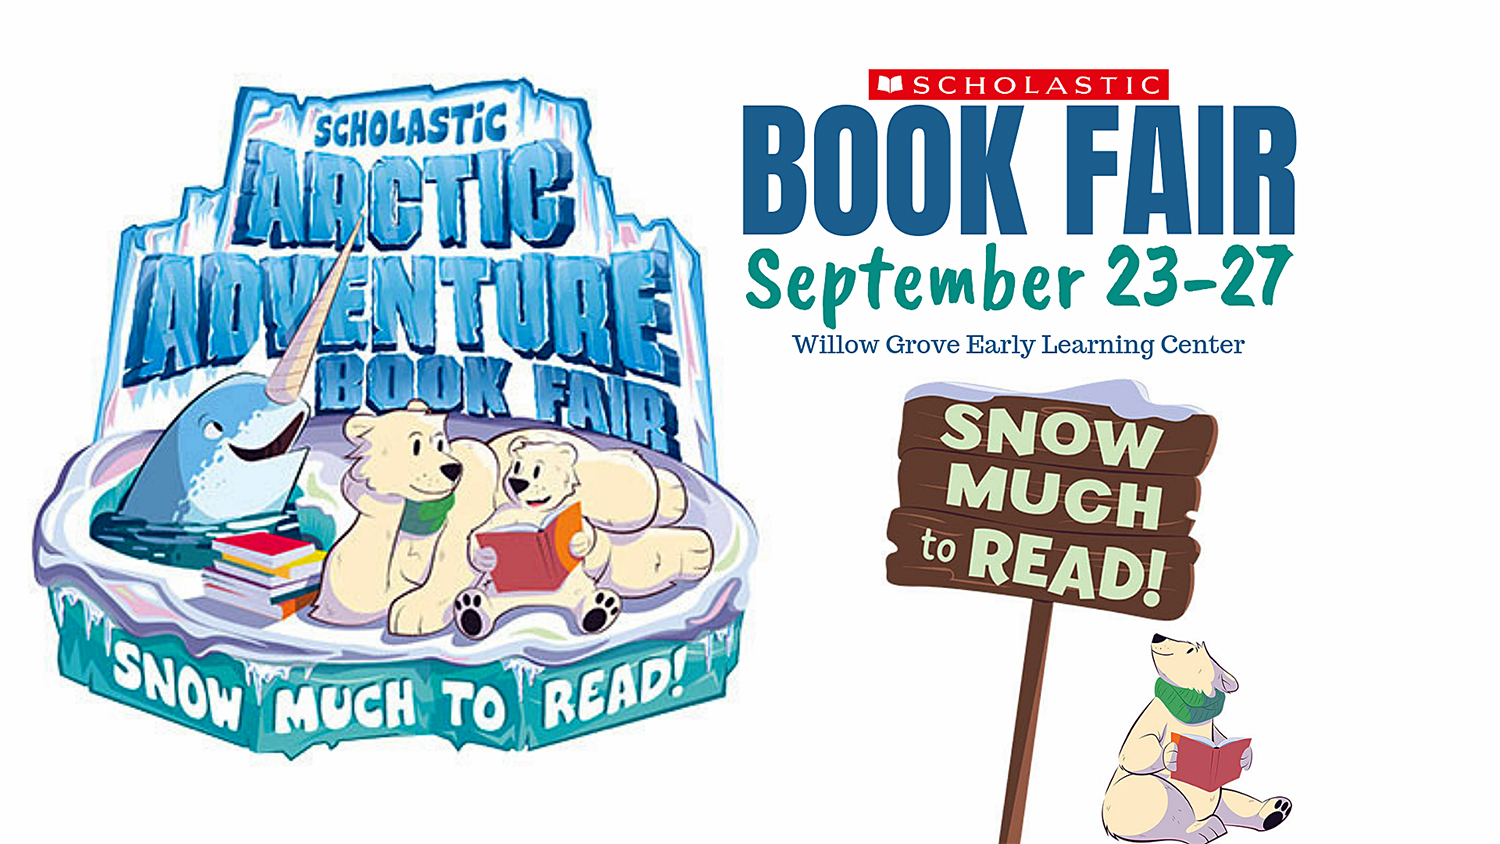 Arctic animals reading books on advertisement with theme Snow much to read